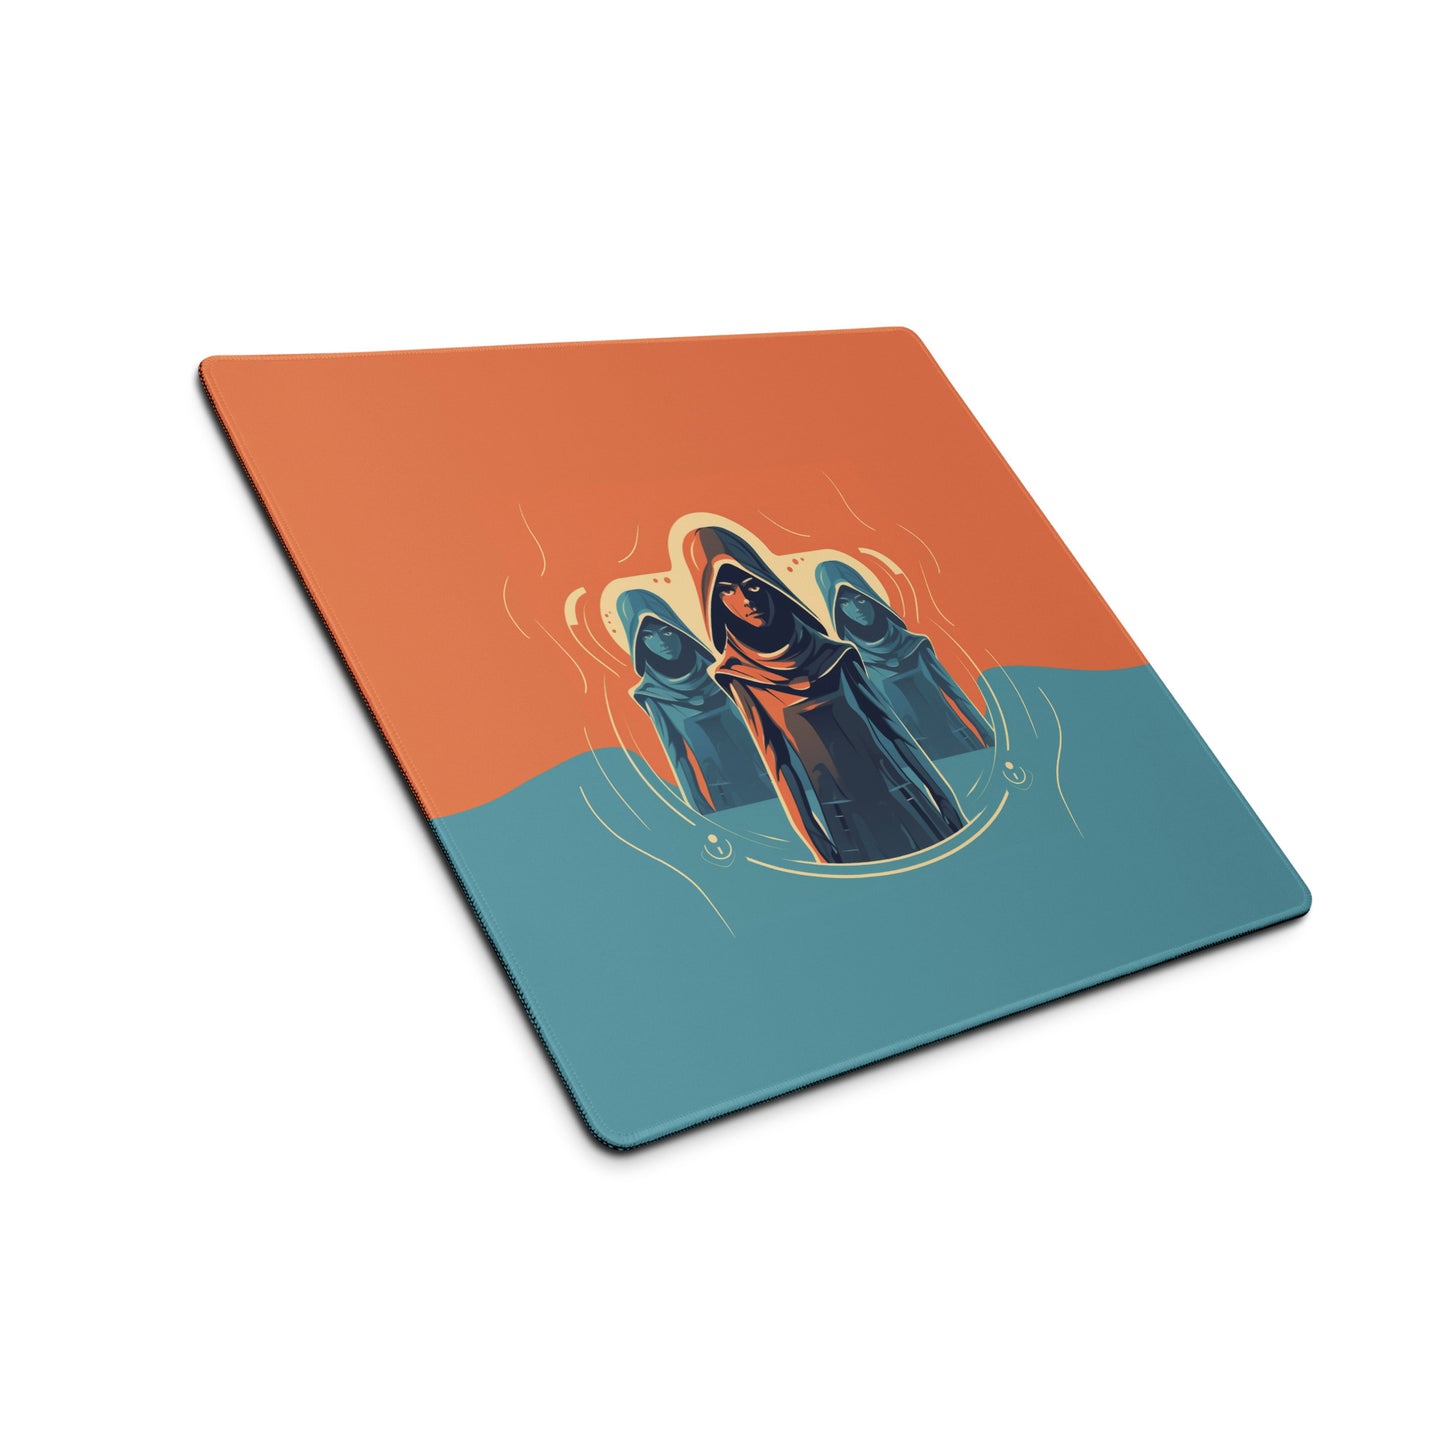 A 18" x 16" orange and blue desk pad with three robed figures sitting at an angle.